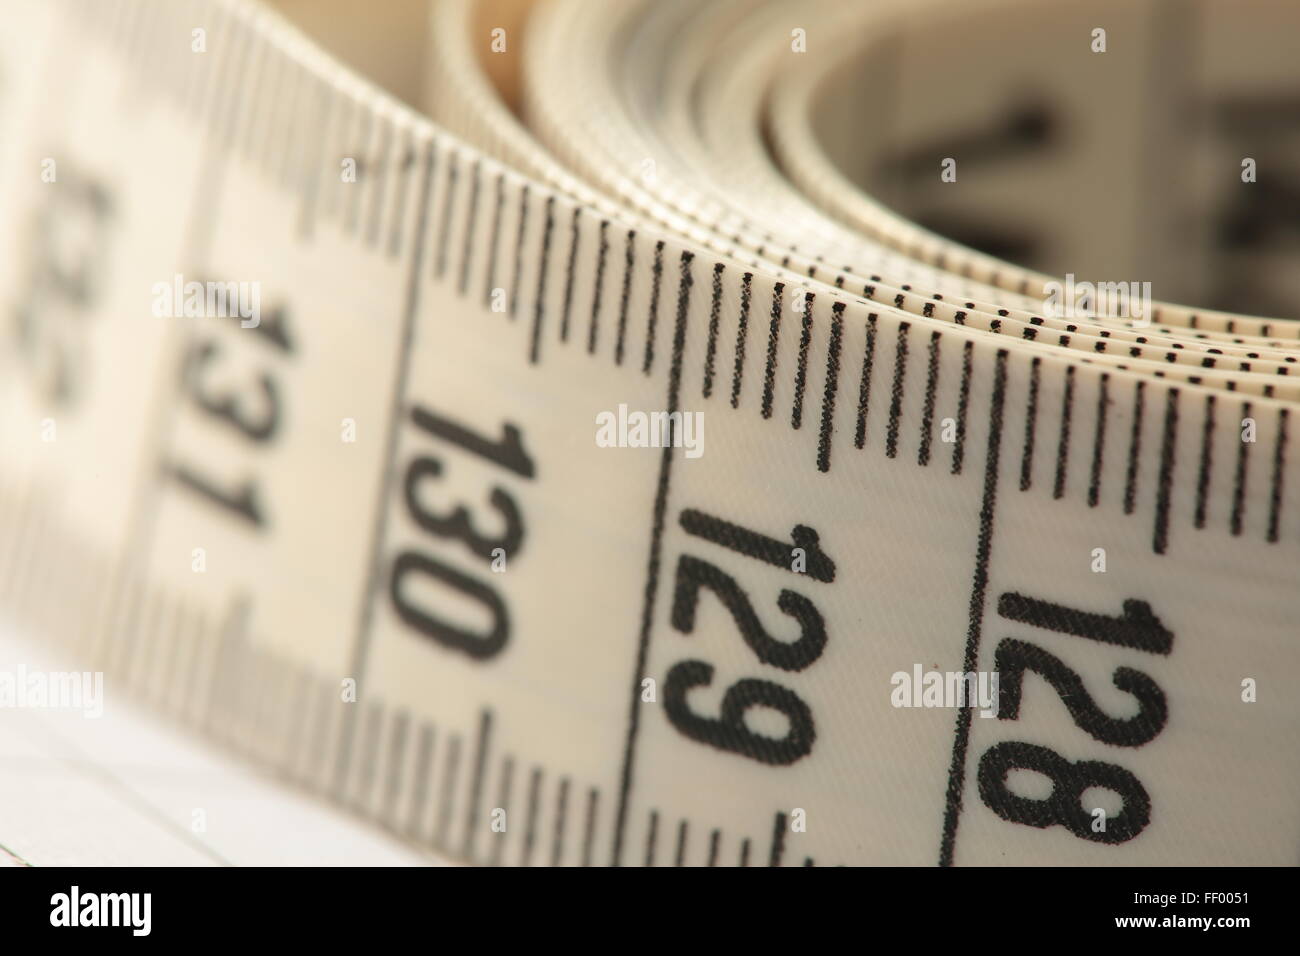 A Close-up of the Tape Measure Stock Image - Image of circumference, tape:  171275191